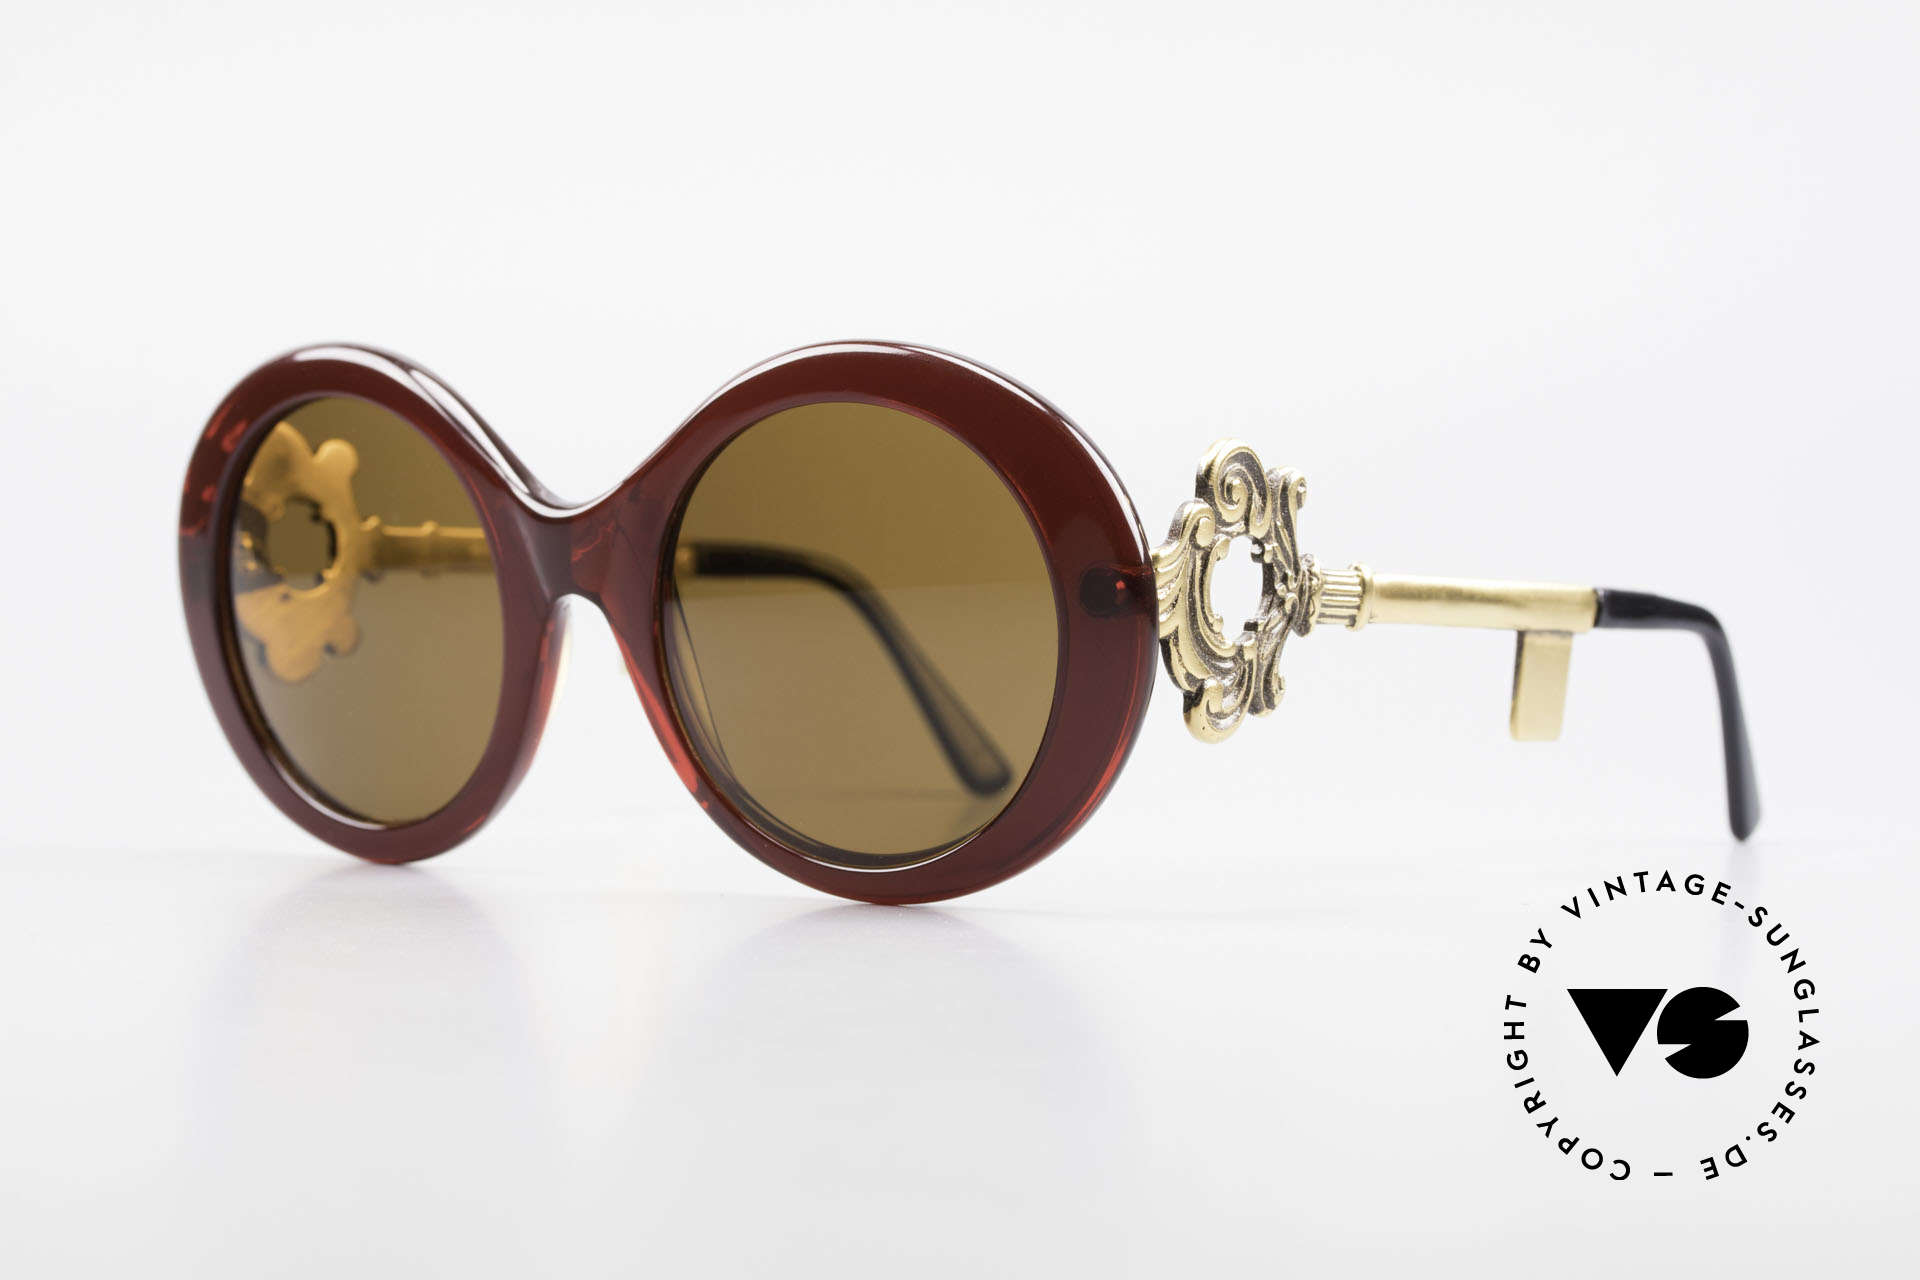 Moschino M254 Antique Key Sunglasses Rare, temples are shaped like an antique key (so FANCY), Made for Women